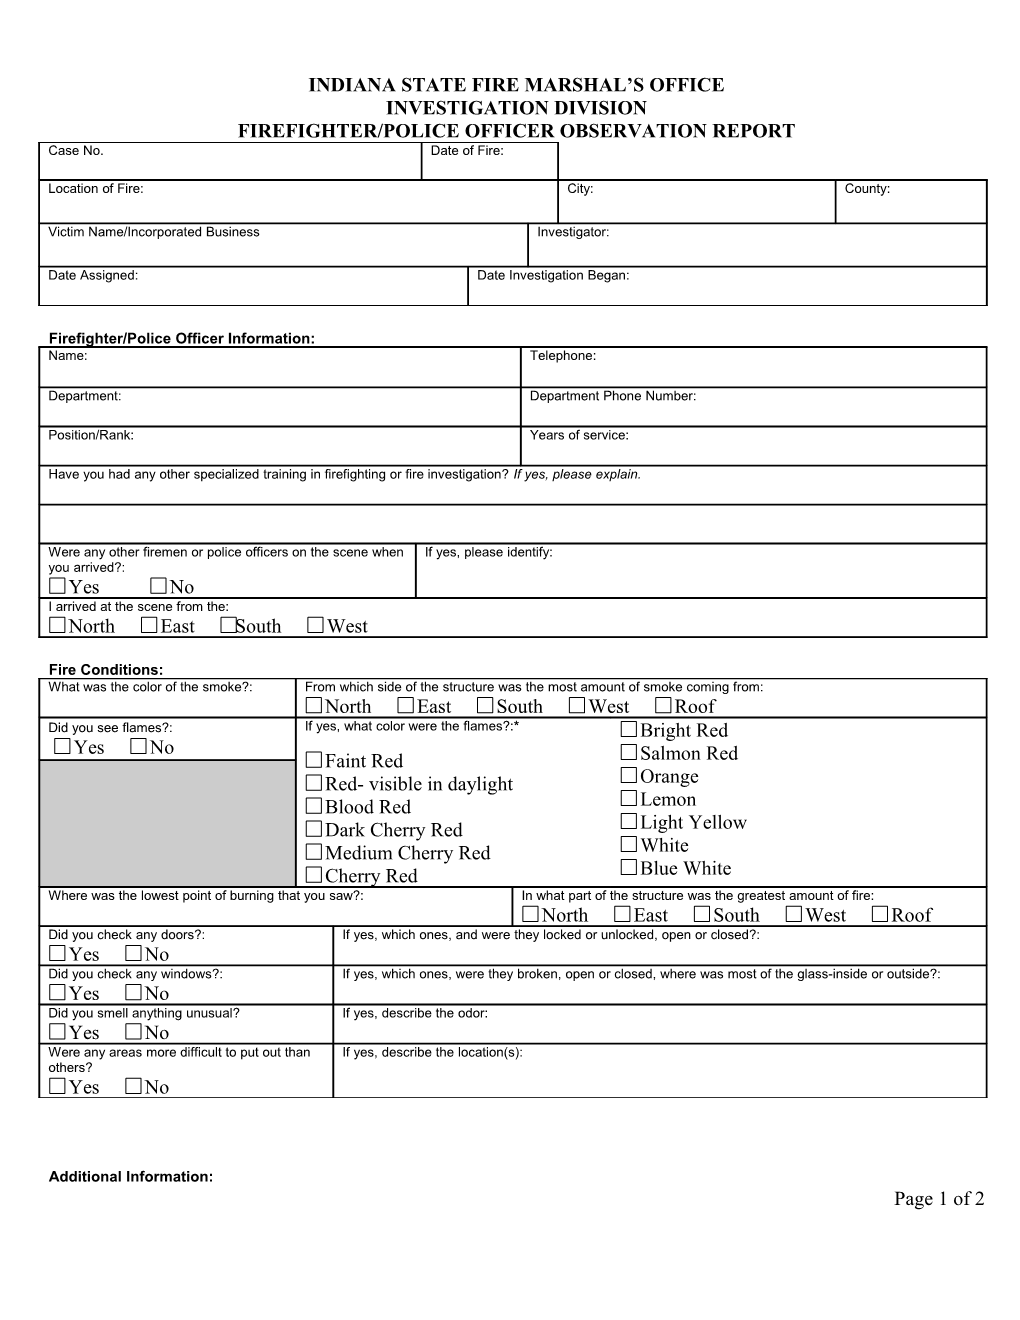 Indiana Fire Marshal Report of Fire Investigation s1